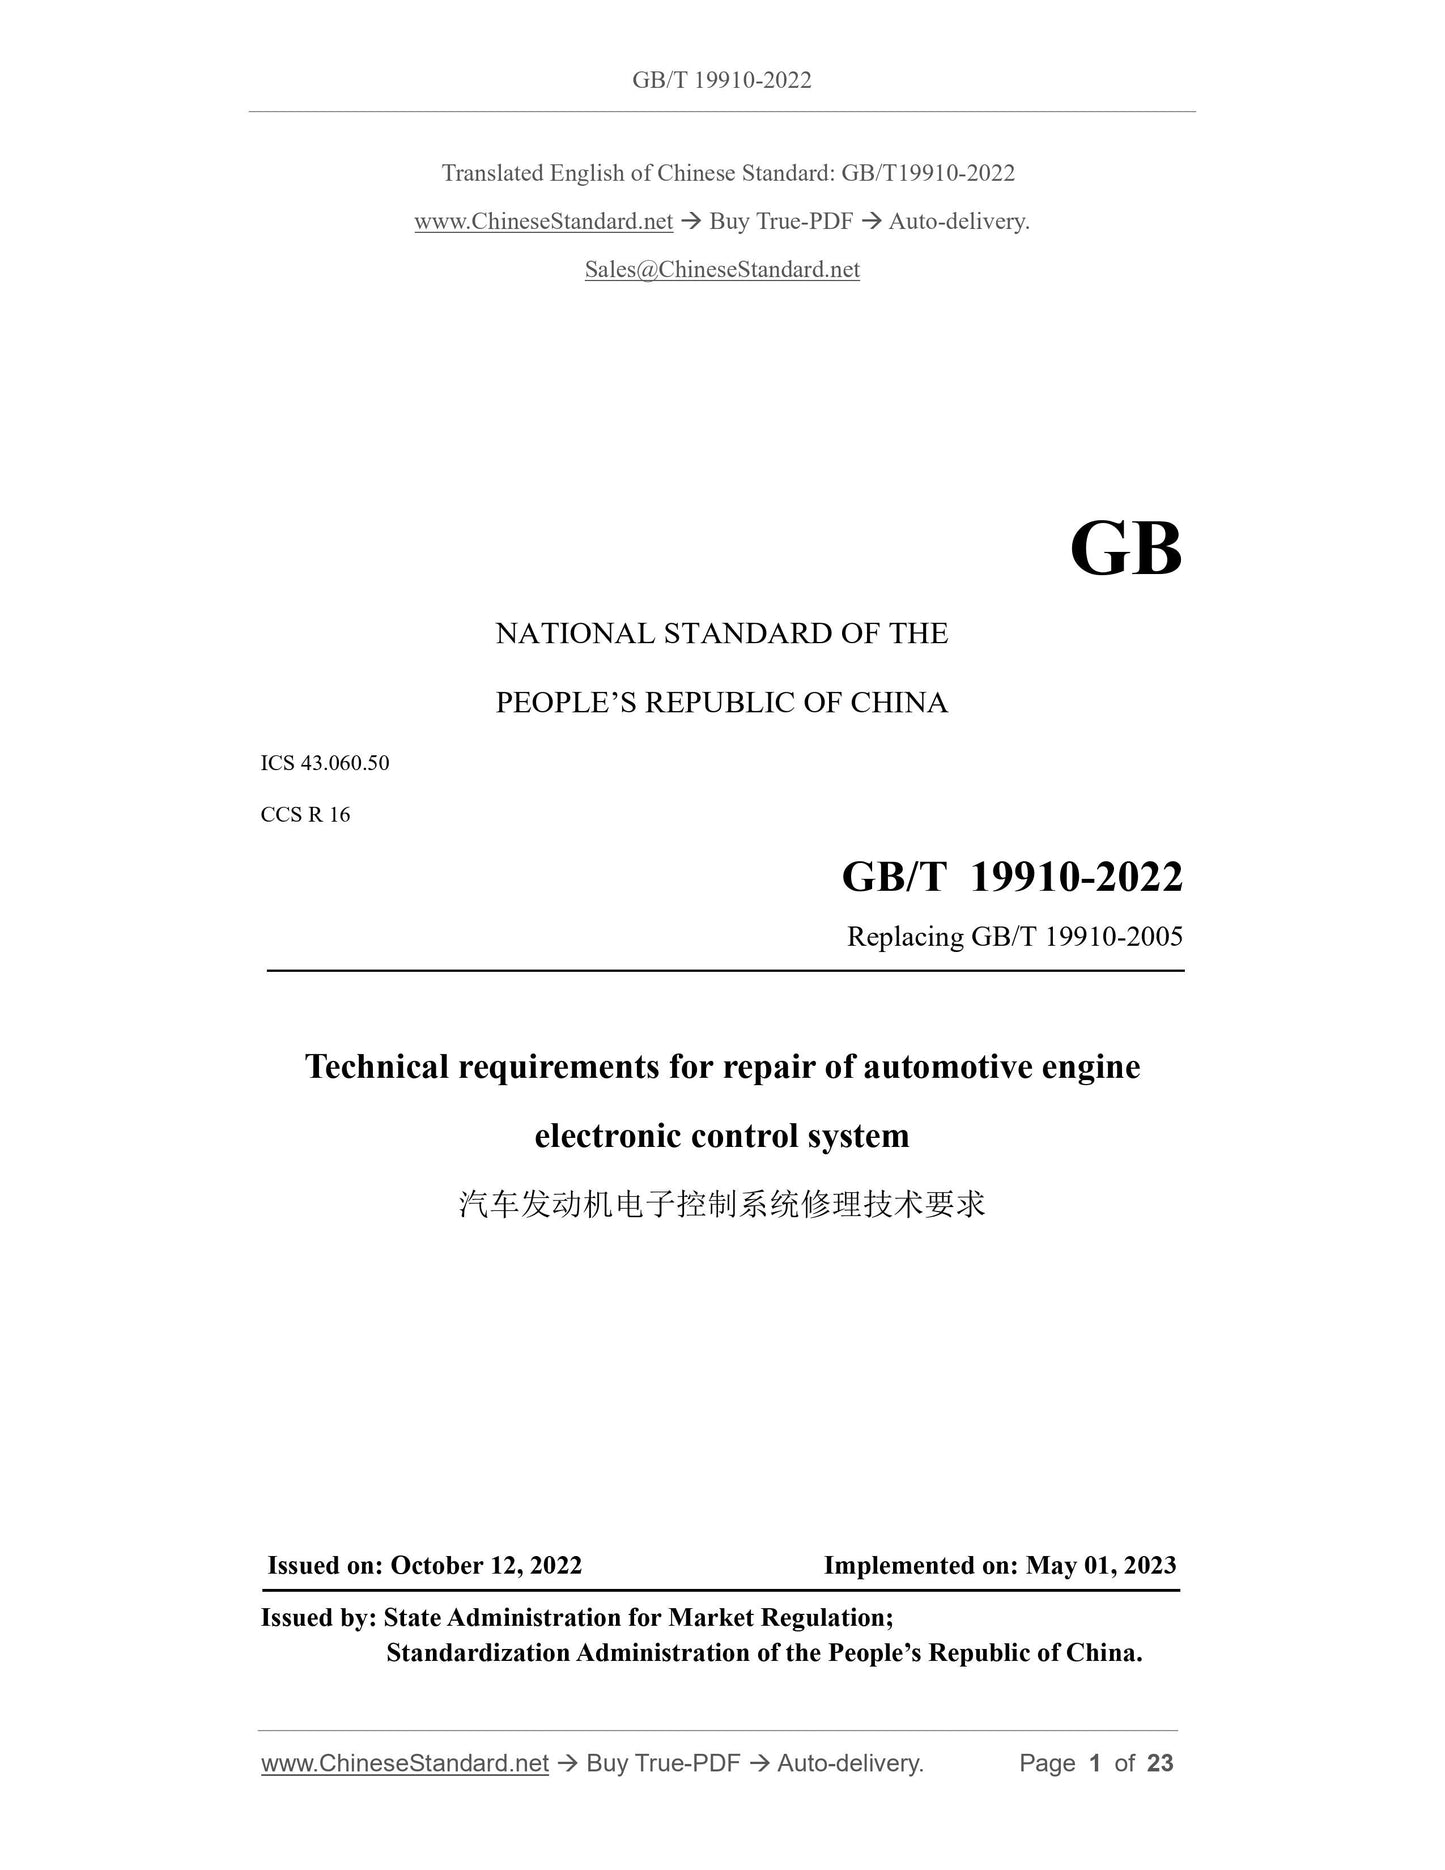 GB/T 19910-2022 Page 1